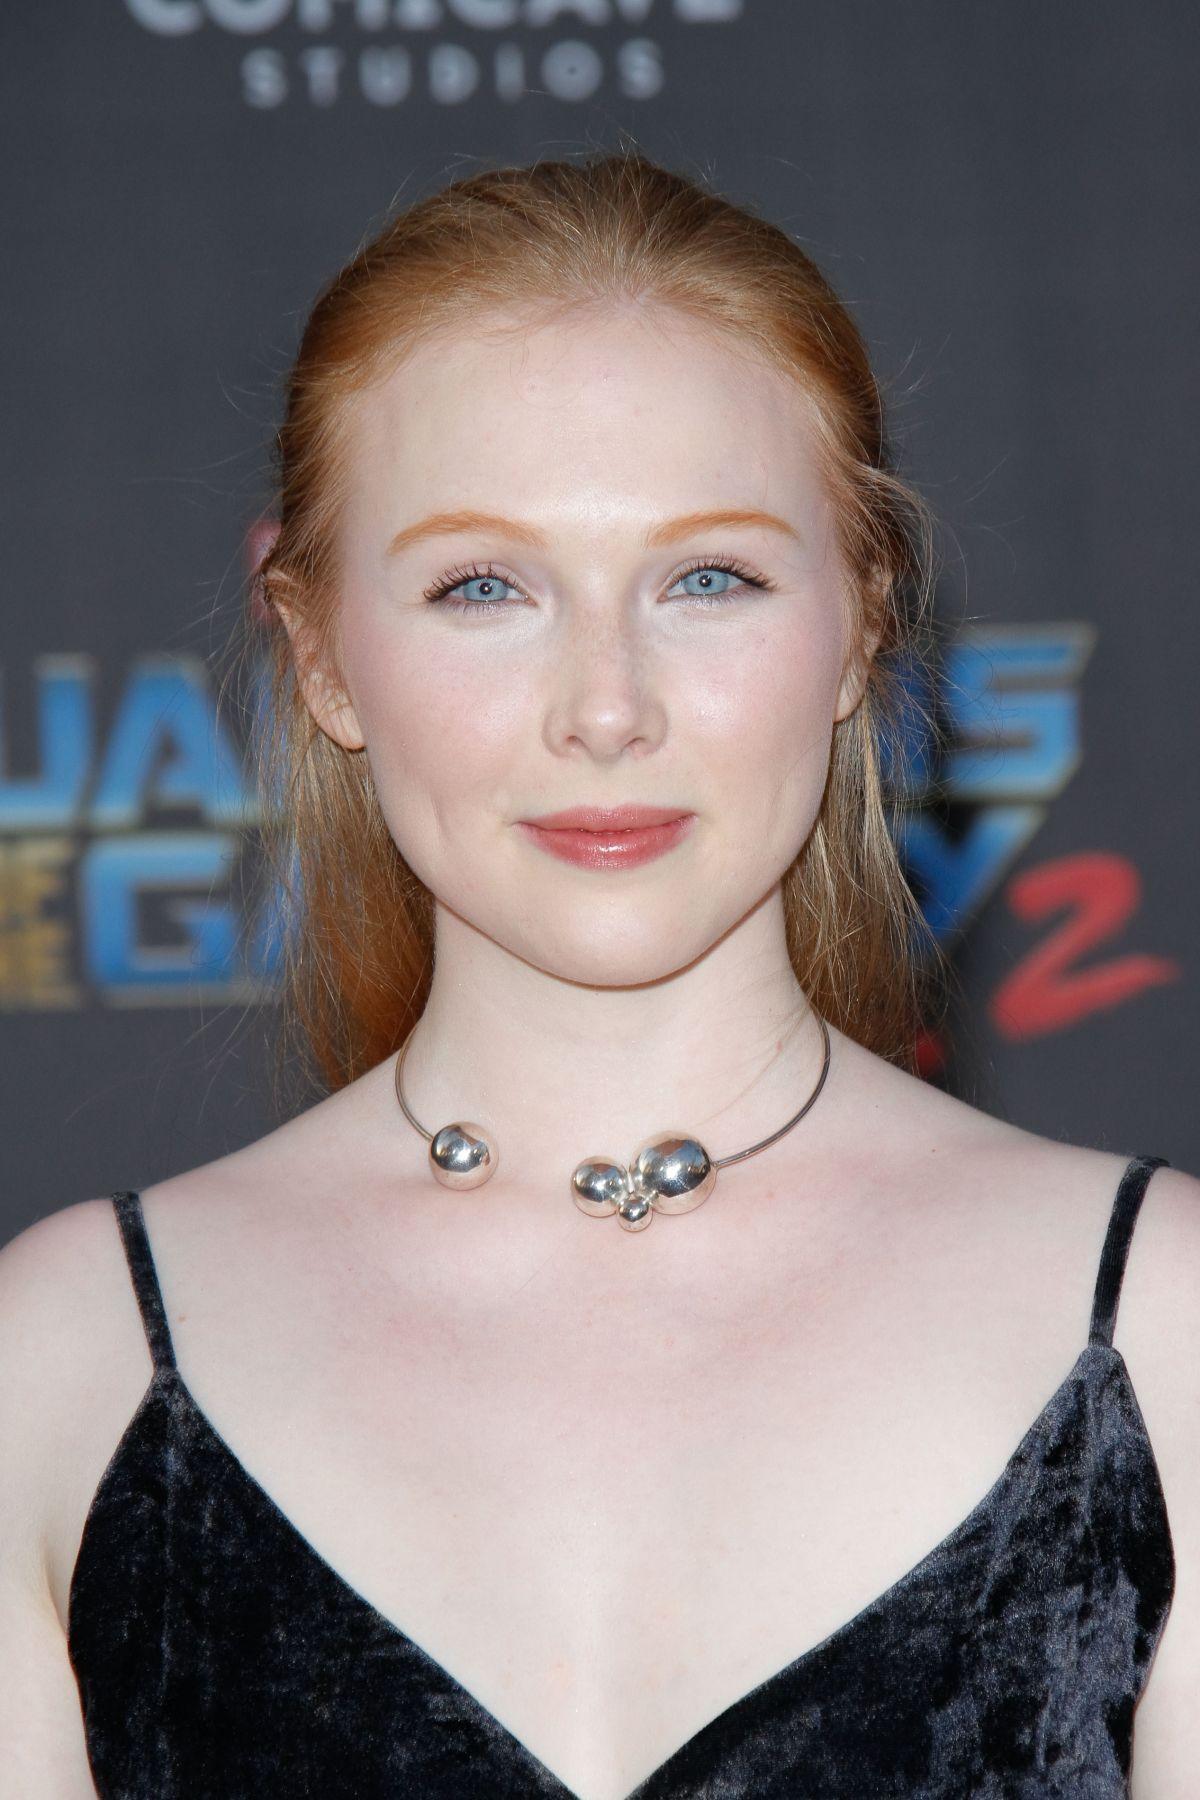 70+ Hot Pictures Of Molly C. Quinn Are God’s Gift For Her Die Hard Fans 137